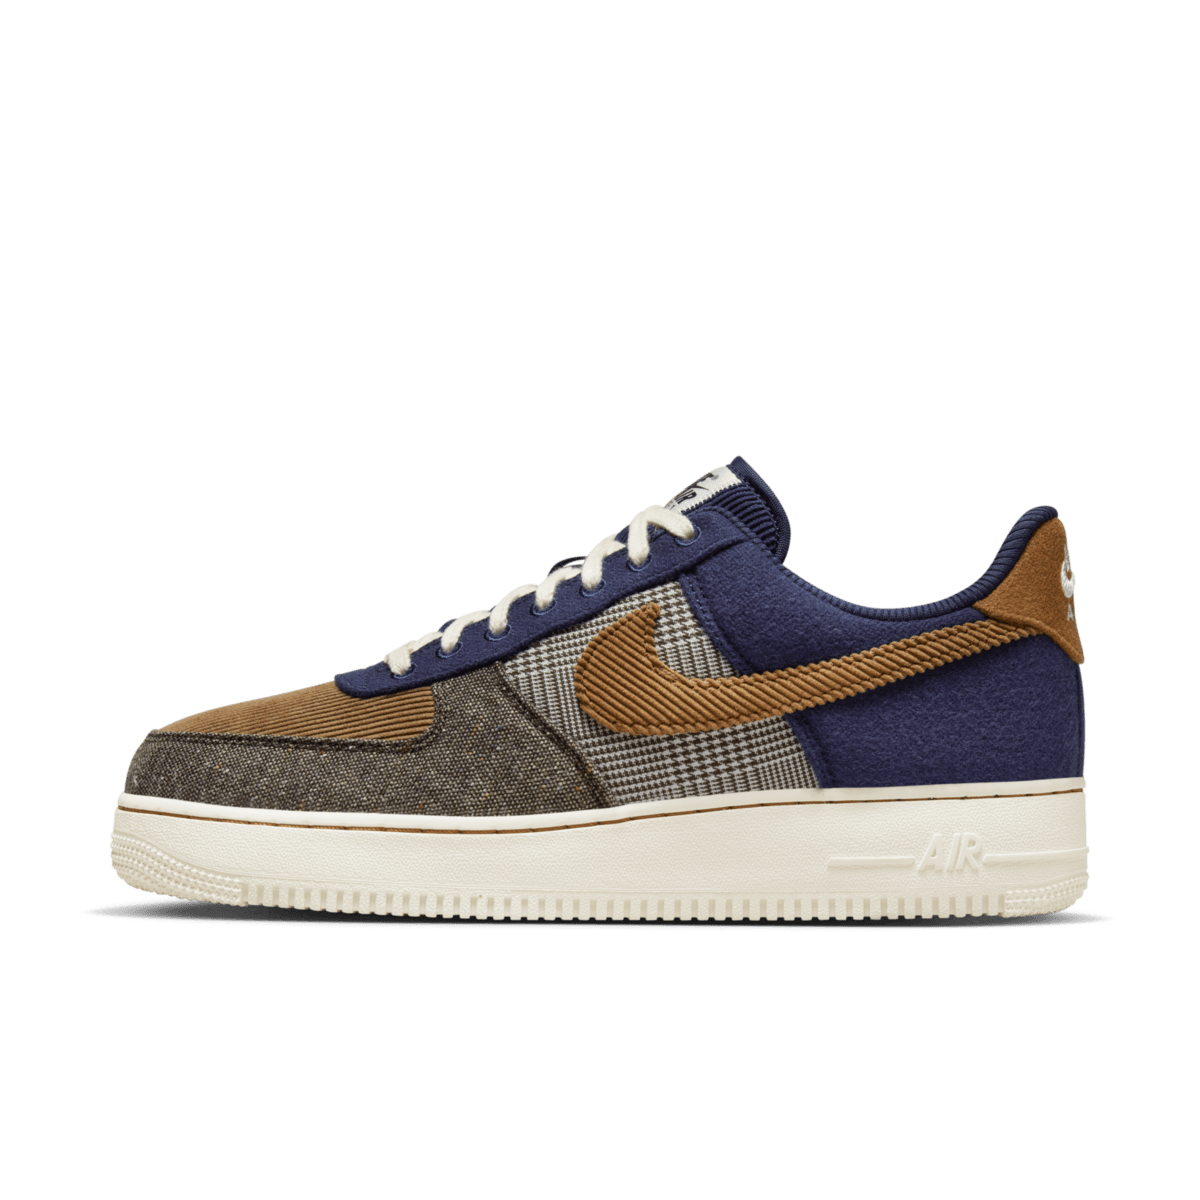 Nike Air Force 1 Low PRM 'Ale Brown and Midnight Navy'